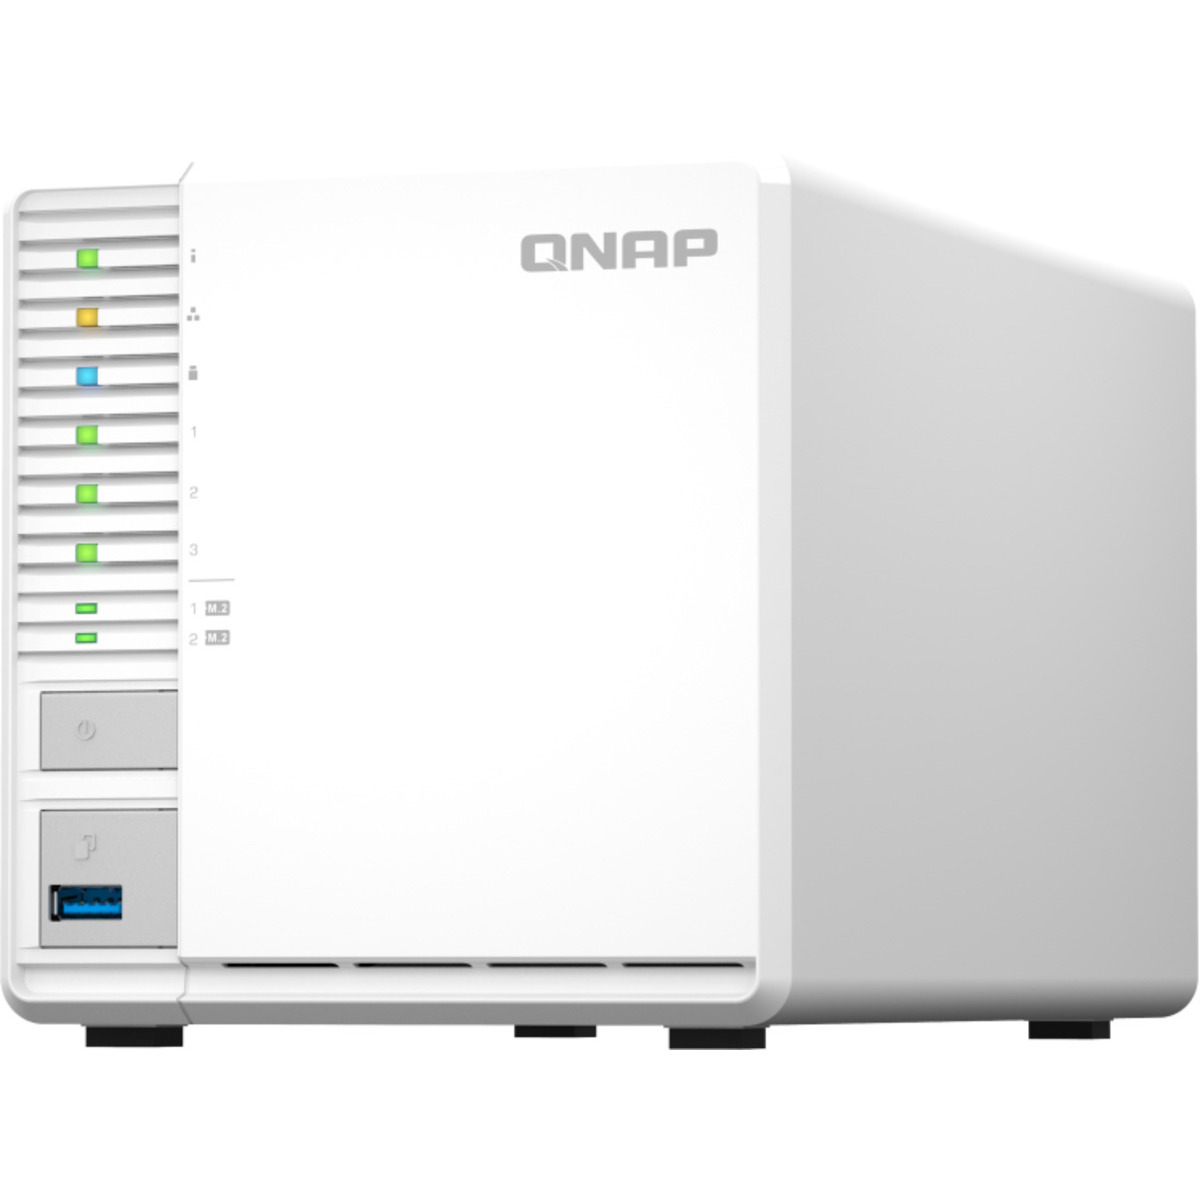 buy QNAP TS-364 6tb Desktop NAS - Network Attached Storage Device 3x2000gb Seagate IronWolf Pro ST2000NT001 3.5 7200rpm SATA 6Gb/s HDD NAS Class Drives Installed - Burn-In Tested - nas headquarters buy network attached storage server device das new raid-5 free shipping simply usa TS-364